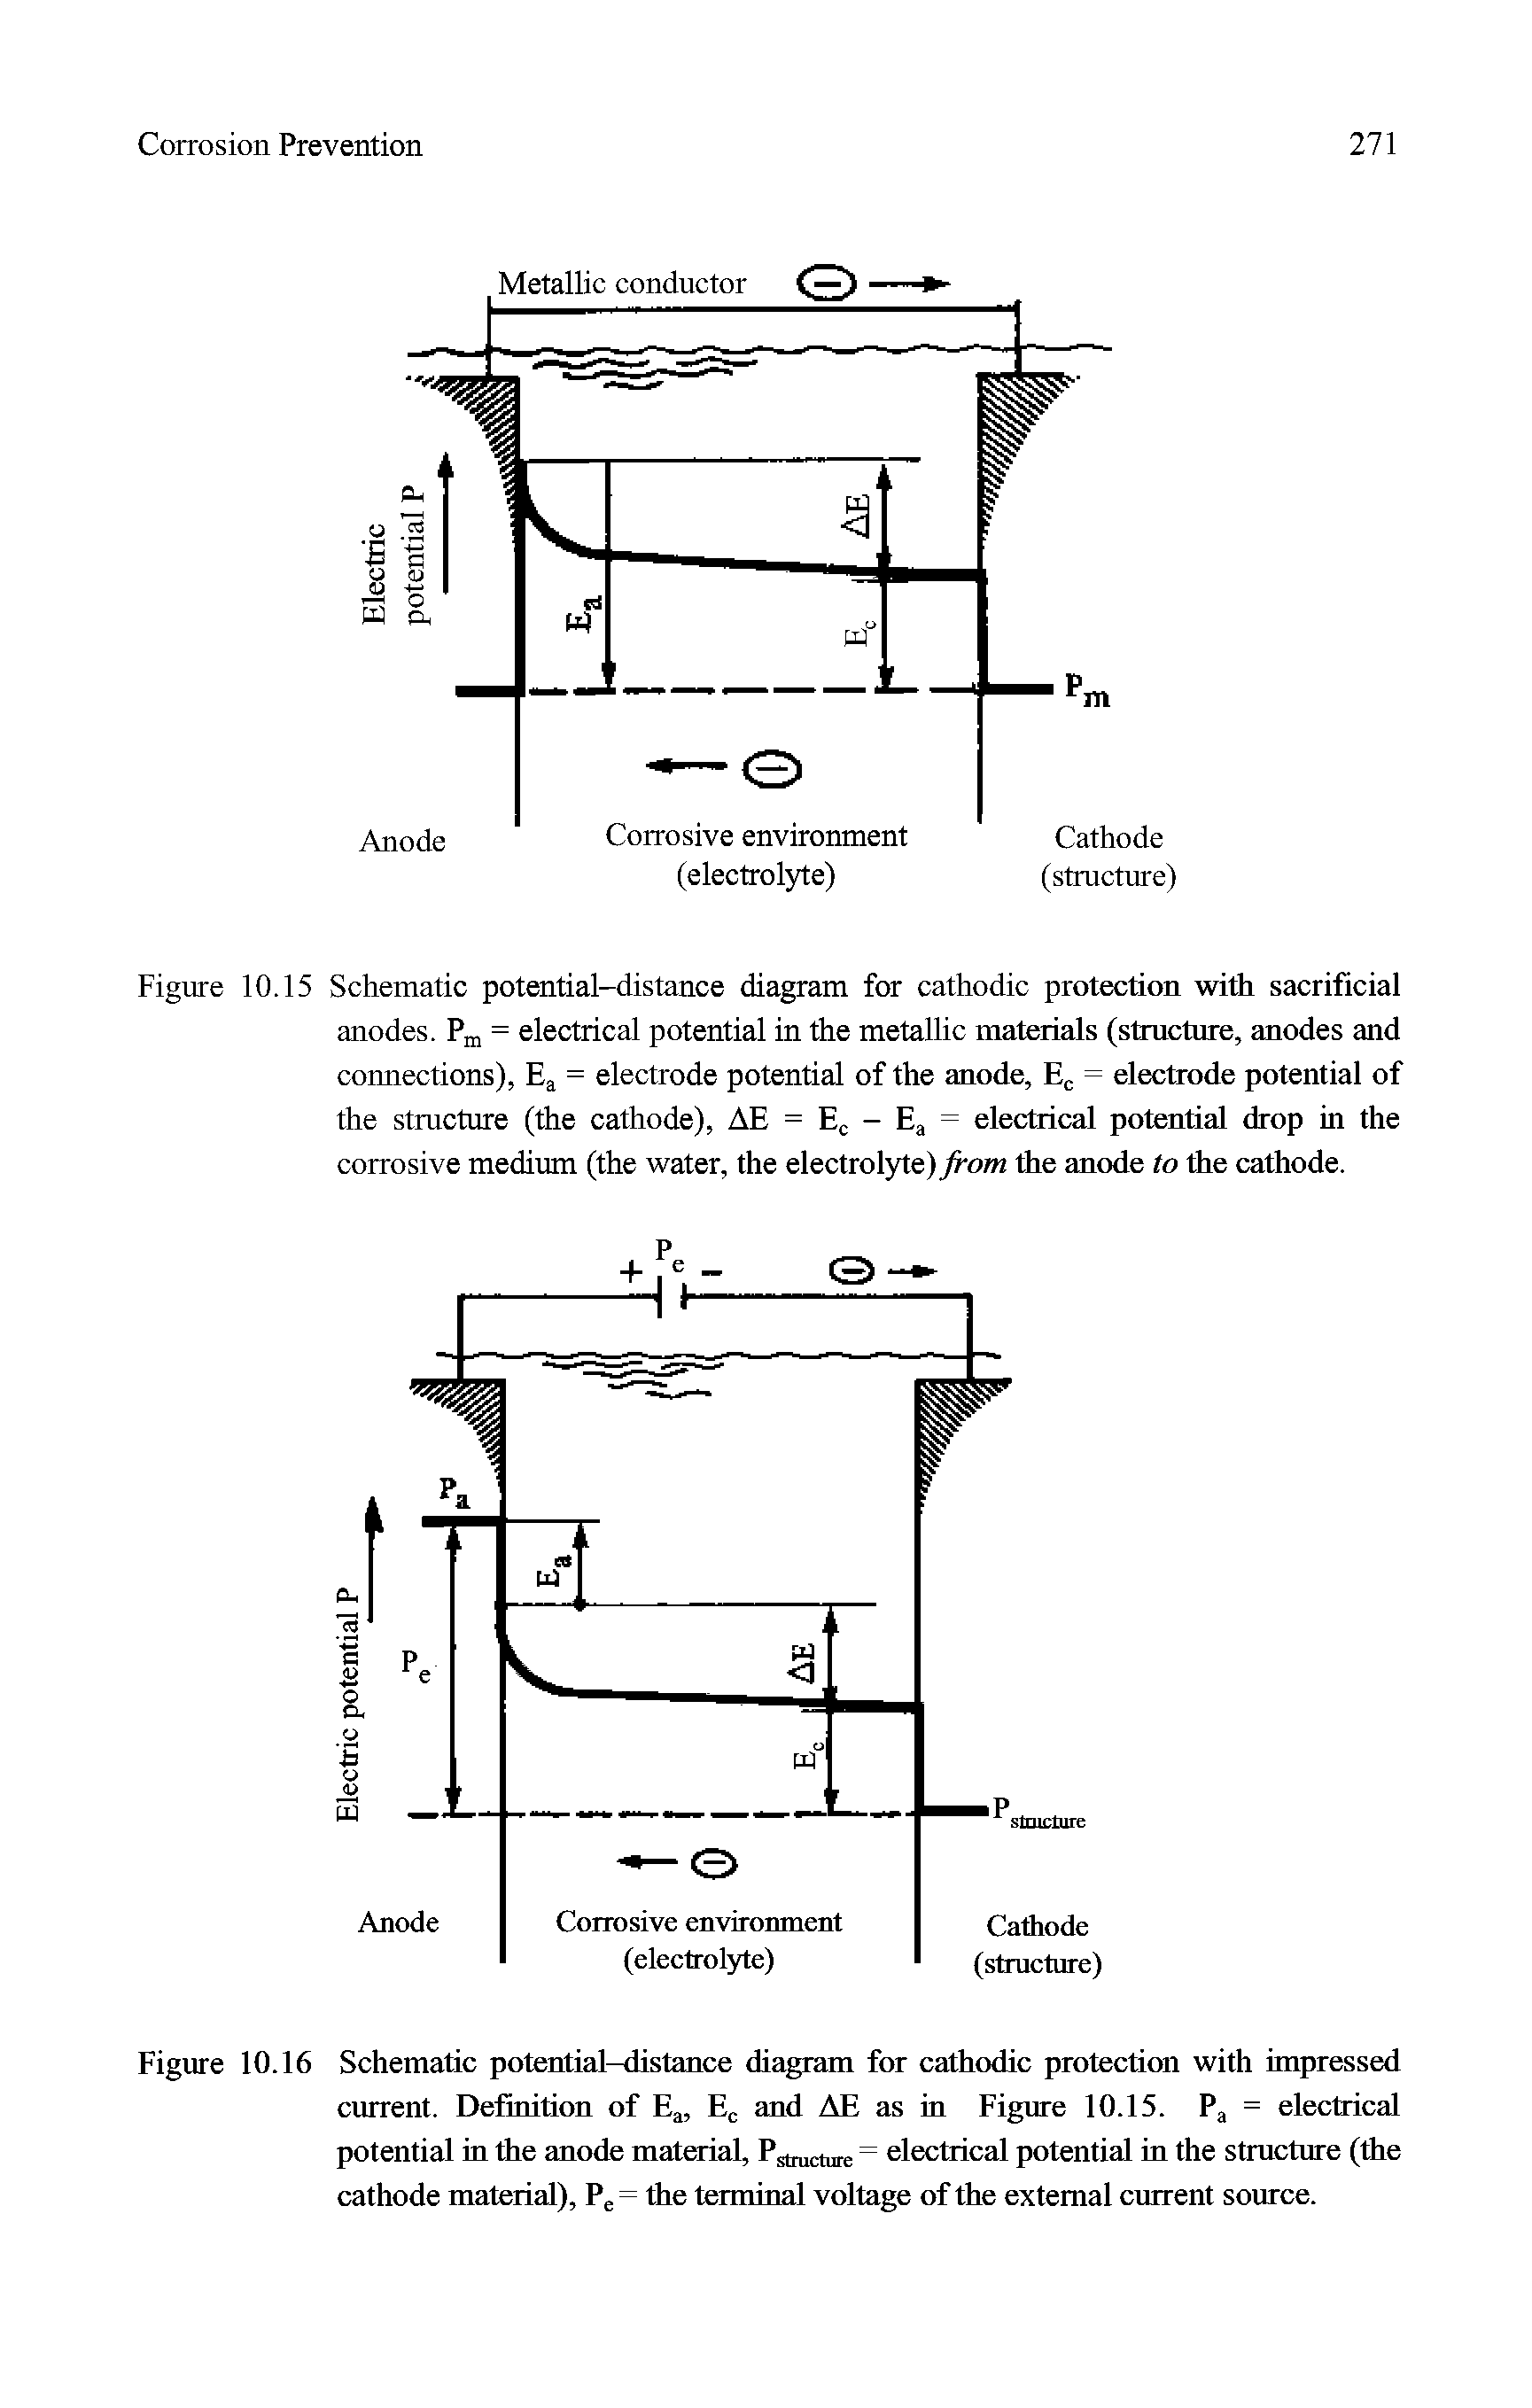 Figure 10.16 Schematic potential-distance diagram for cathodic protection with impressed current. Definition of Ea, E and AE as in Figure 10.15. Pj = electrical potential in the anode material, Pstmcture = electrical potential in the structure (the cathode material), Pj = the terminal voltage of the external current source.